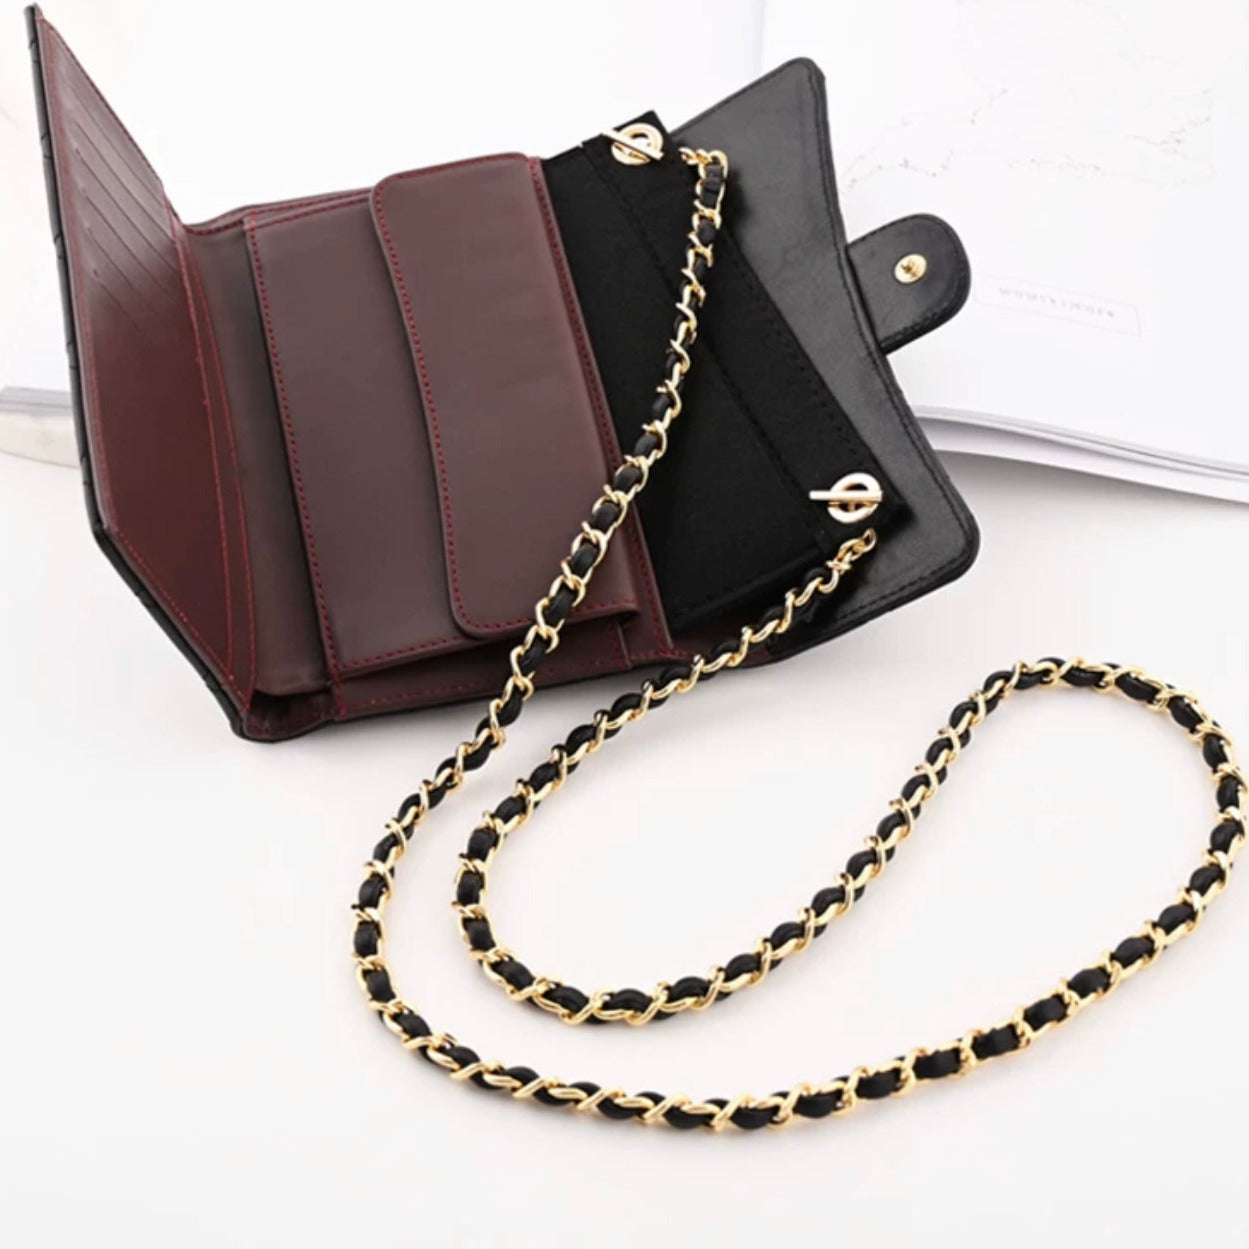 Buy on the official website Card Holder Conversion Kit for Small Flap Wallet  Insert & Chain Strap, Classic Small Wallet on Chain, Credit Card Holder  Insert Crossbody Converter Kit (120cm Old Gold